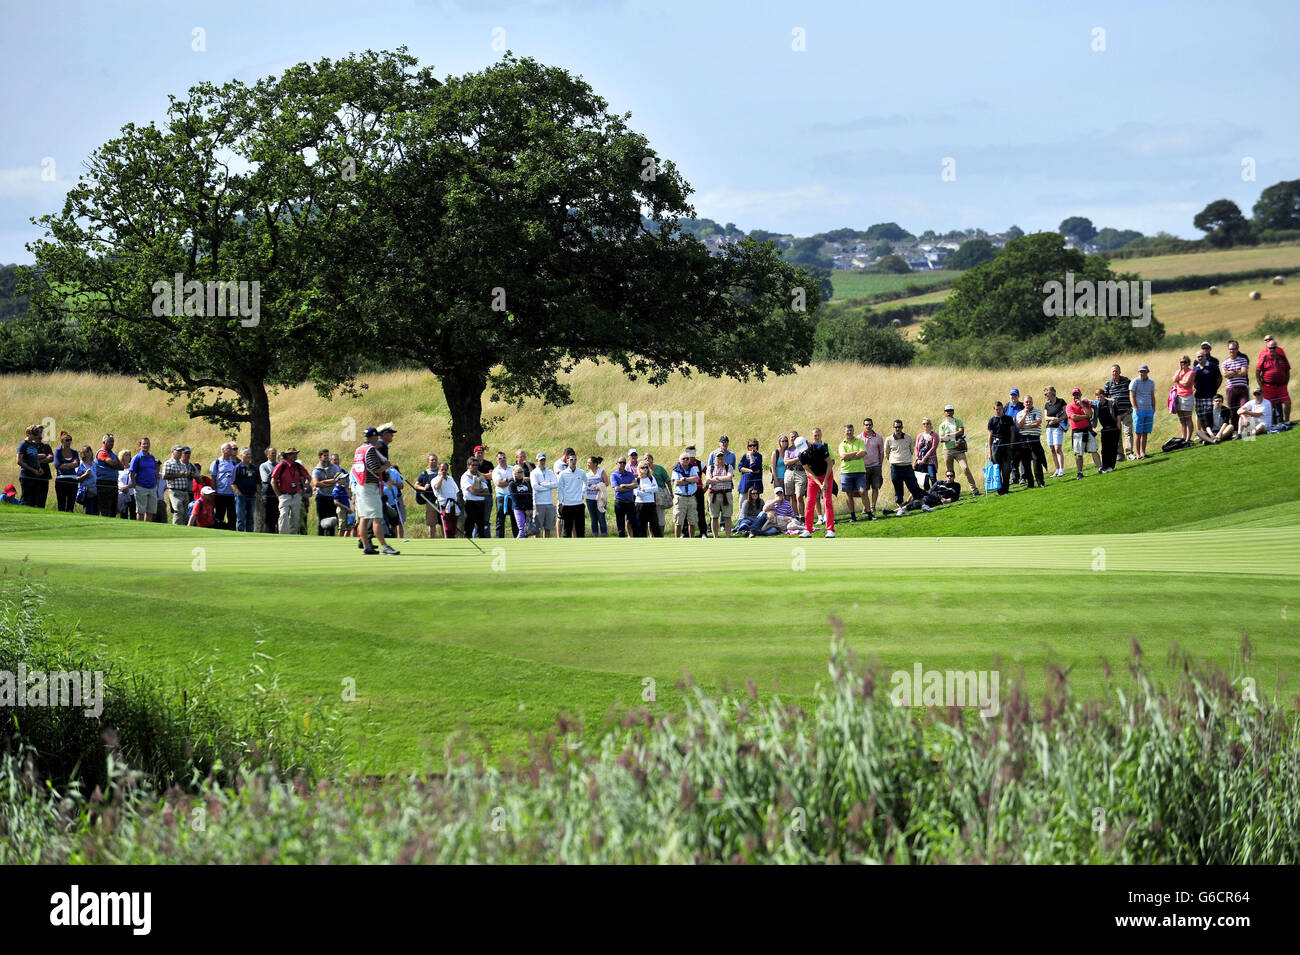 France's Gregory Bourdy puts on the 3rd green during the ISPS Handa Wales Open at Celtic Manor, Newport. Stock Photo